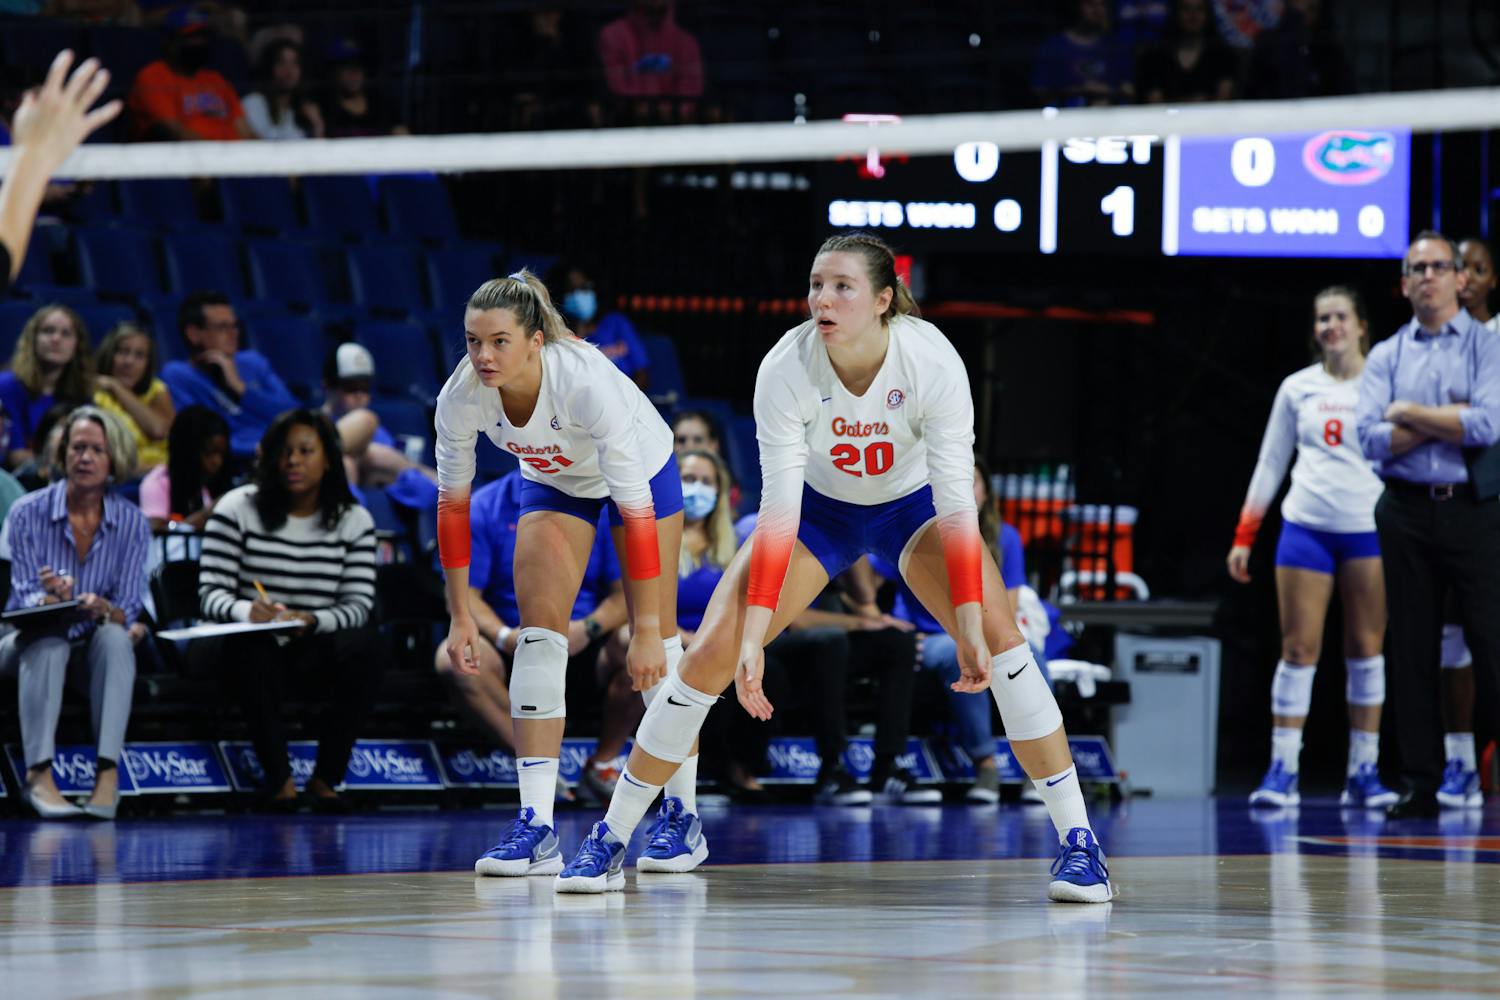 Florida's Marlie Monserez (left) and Thayer Hall (right), pictured during a game against Texas A&M on Oct. 16.